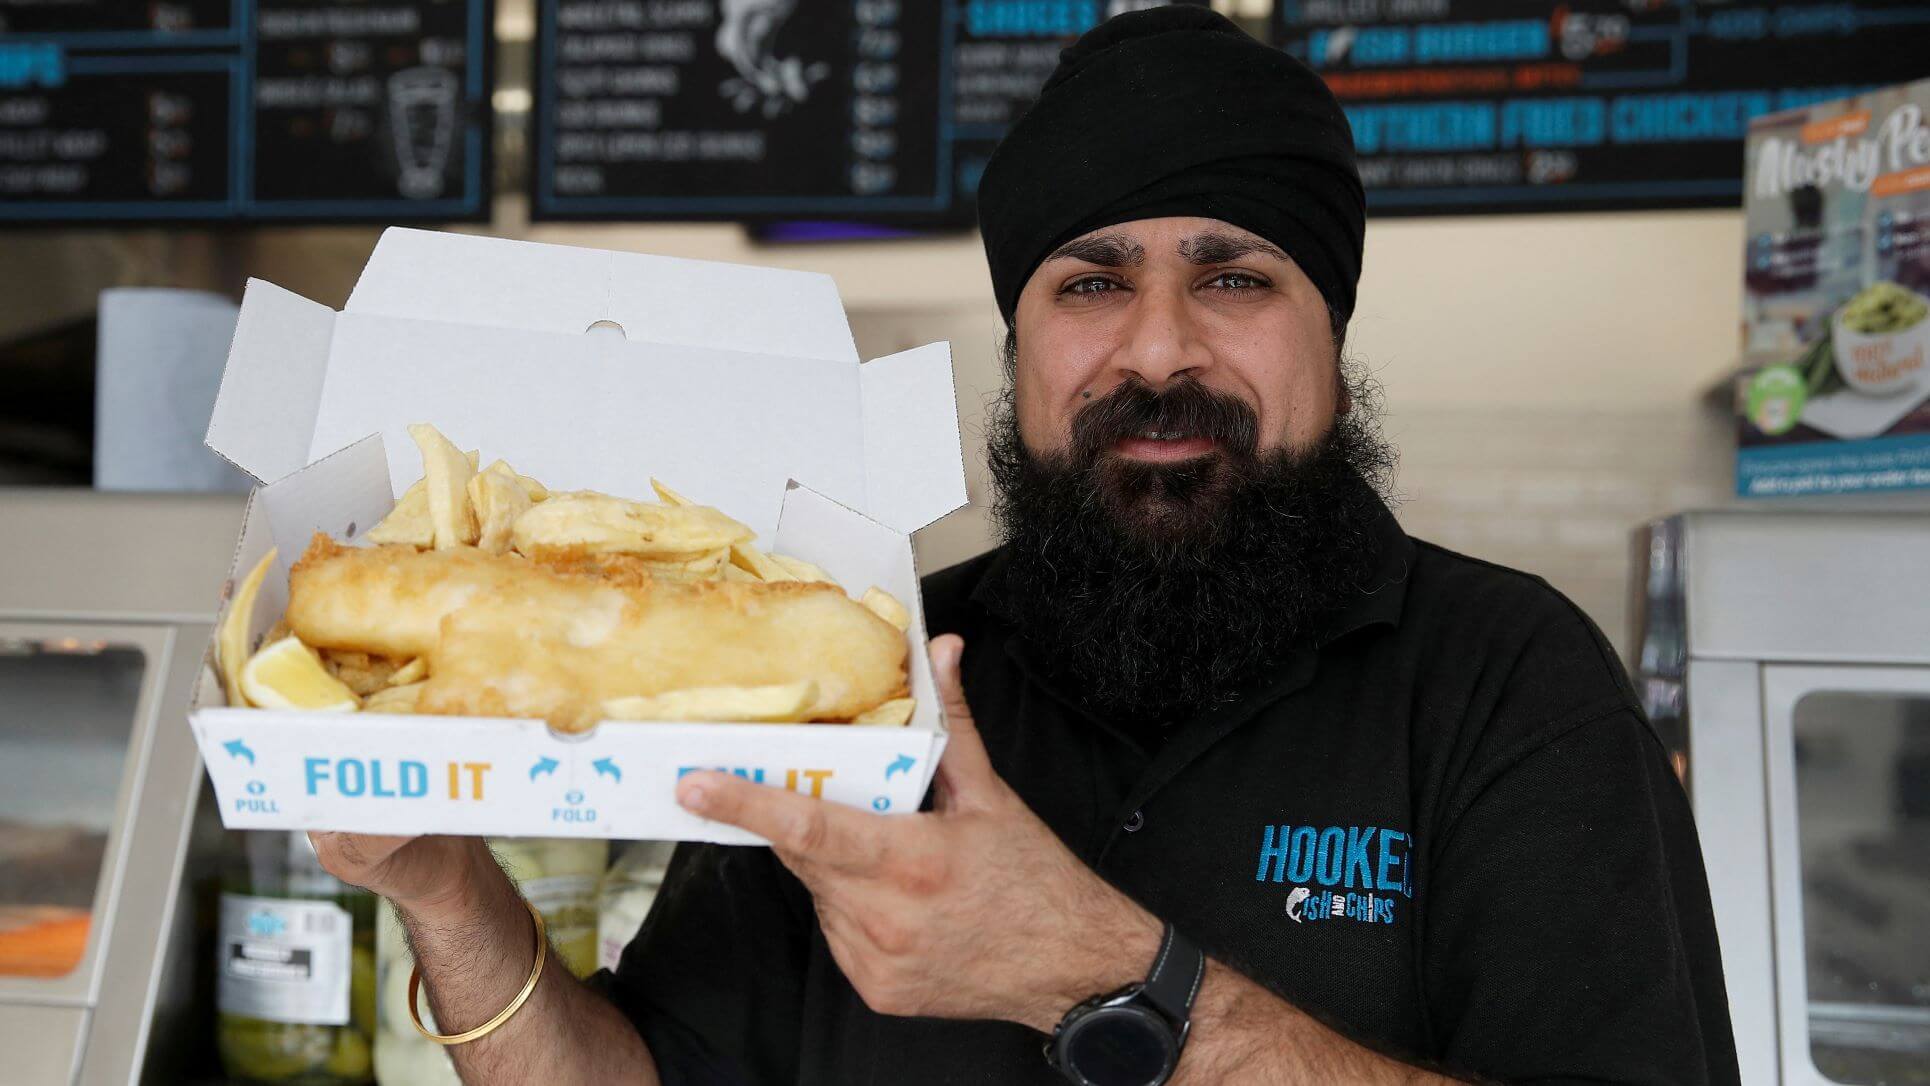 The End Of Fish And Chips? Rising Prices Threaten A British Tradition